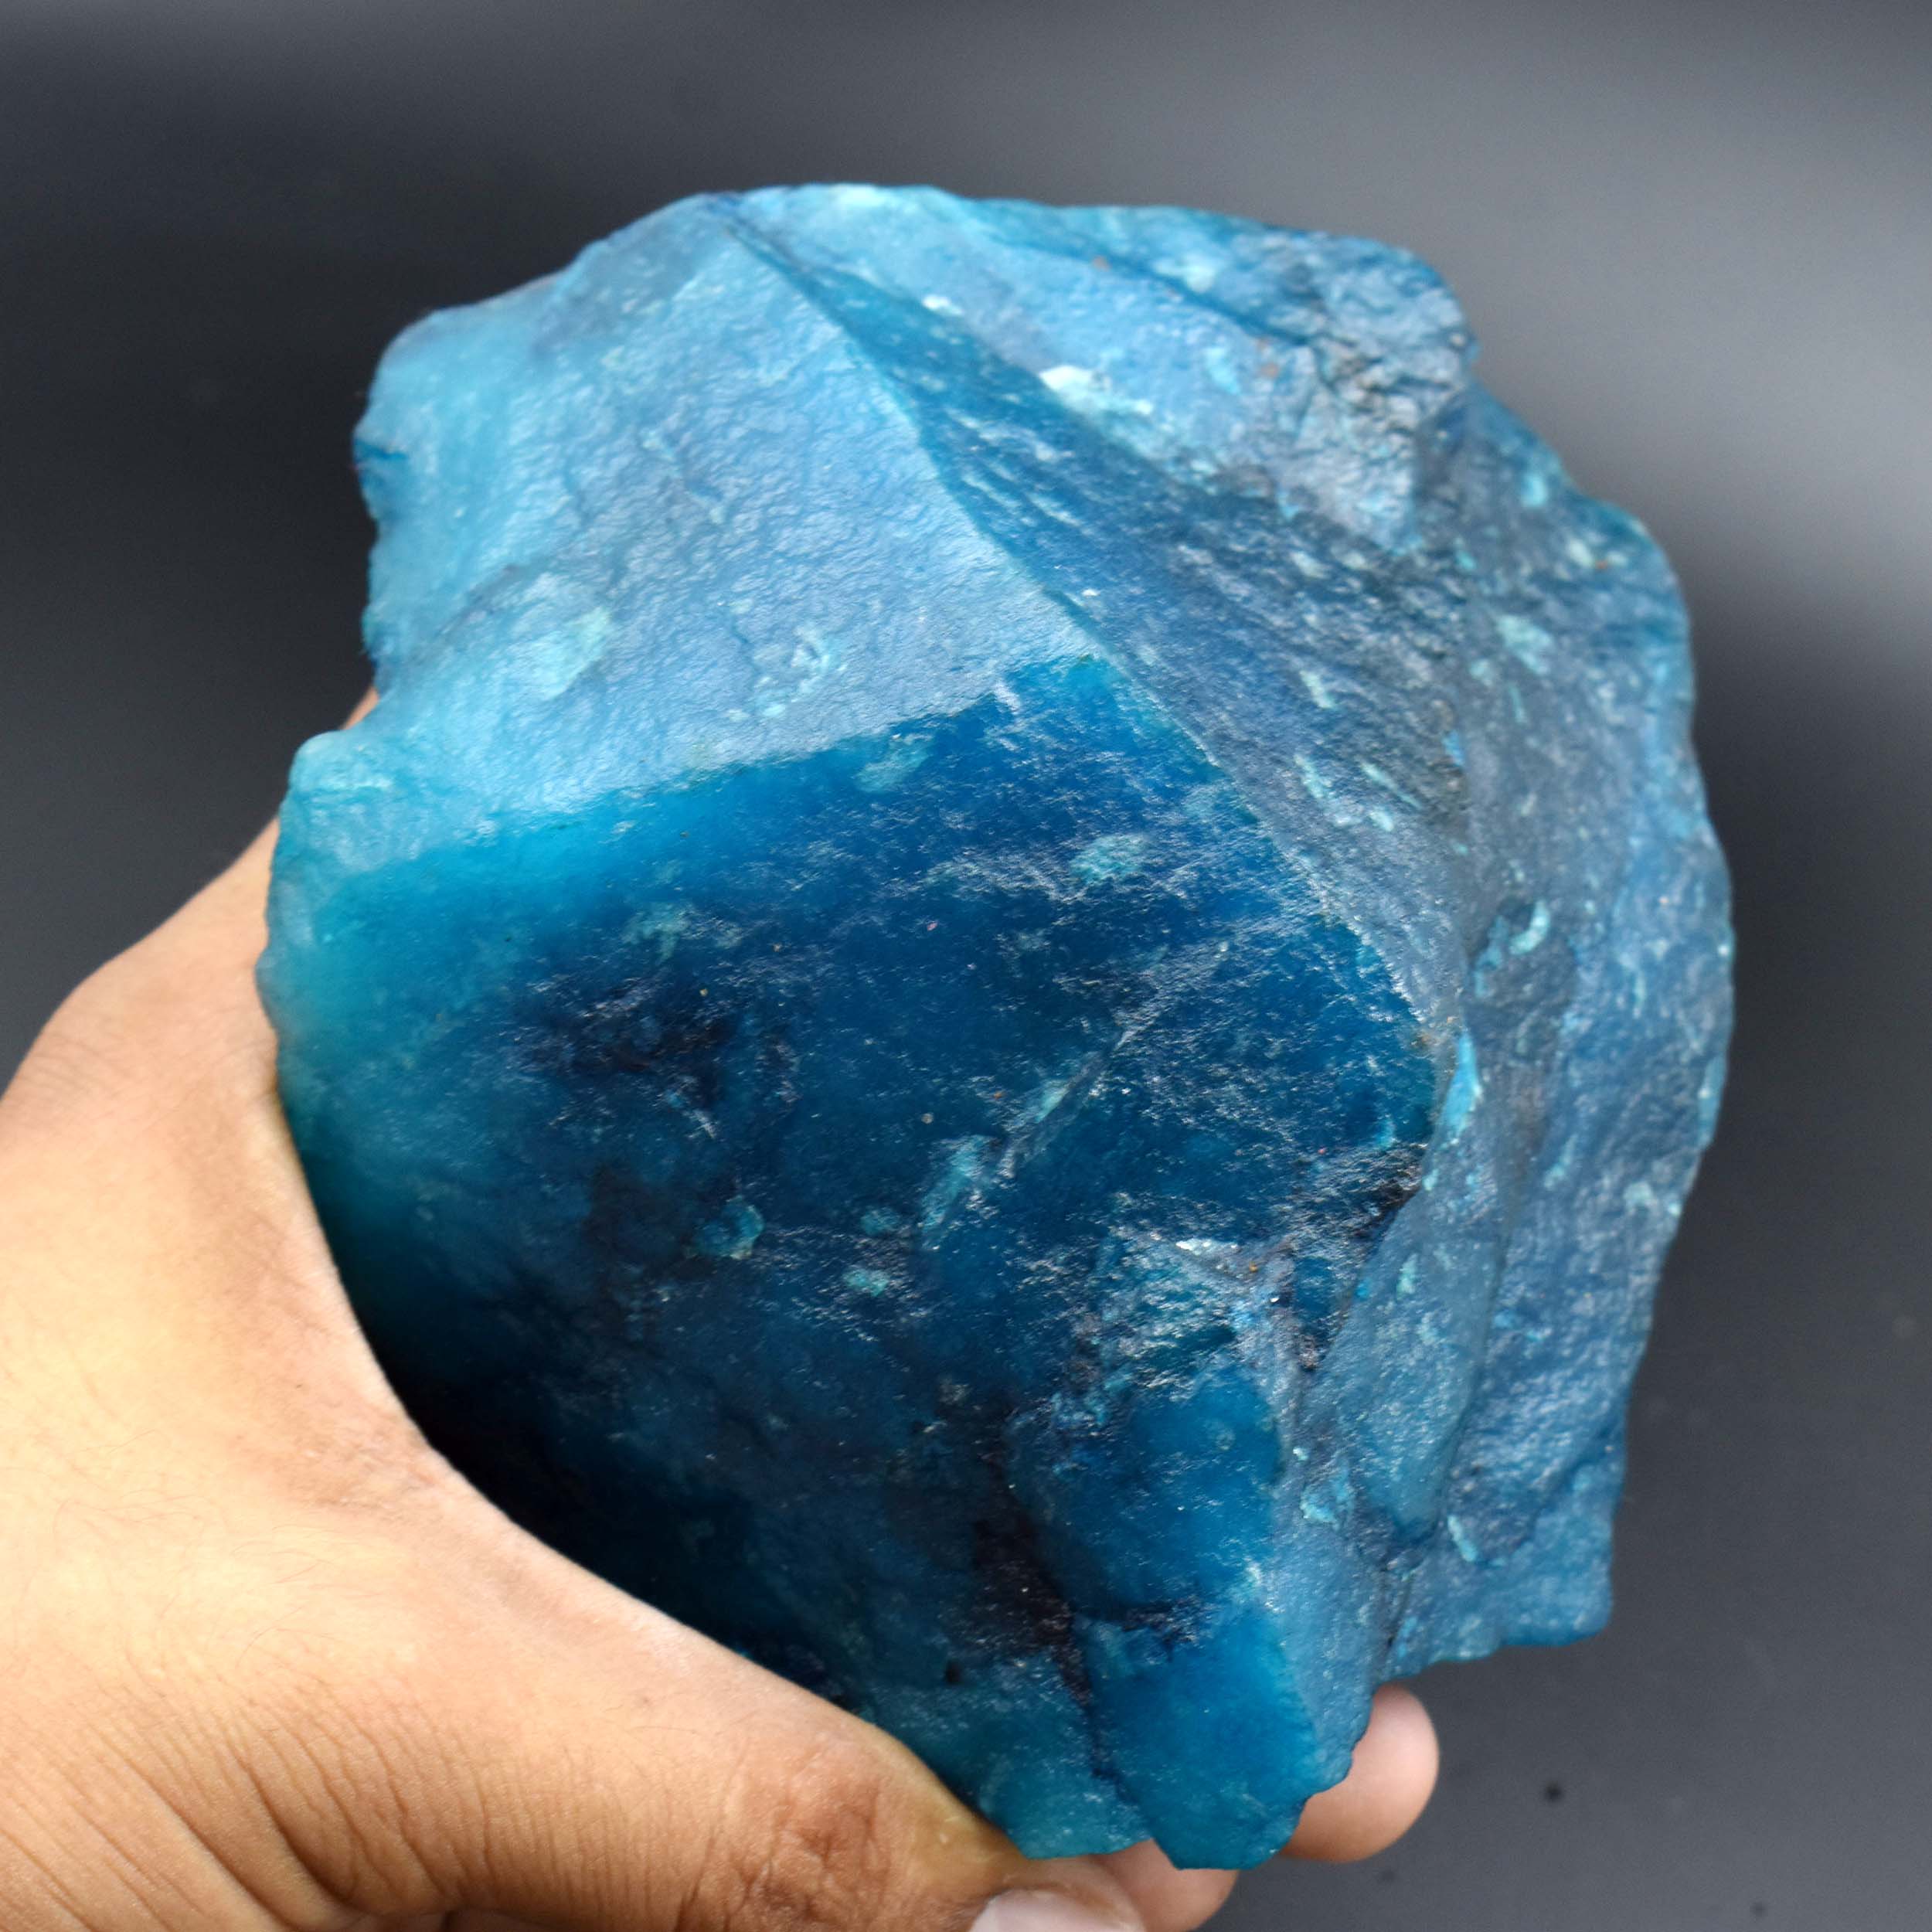 Bumper Offer On Aquamarine !! Natural Uncut Rough 2500.65 Ct Blue Aquamarine Raw Rough Certified Loose Gemstone | Best For Investment Potential & Collectability